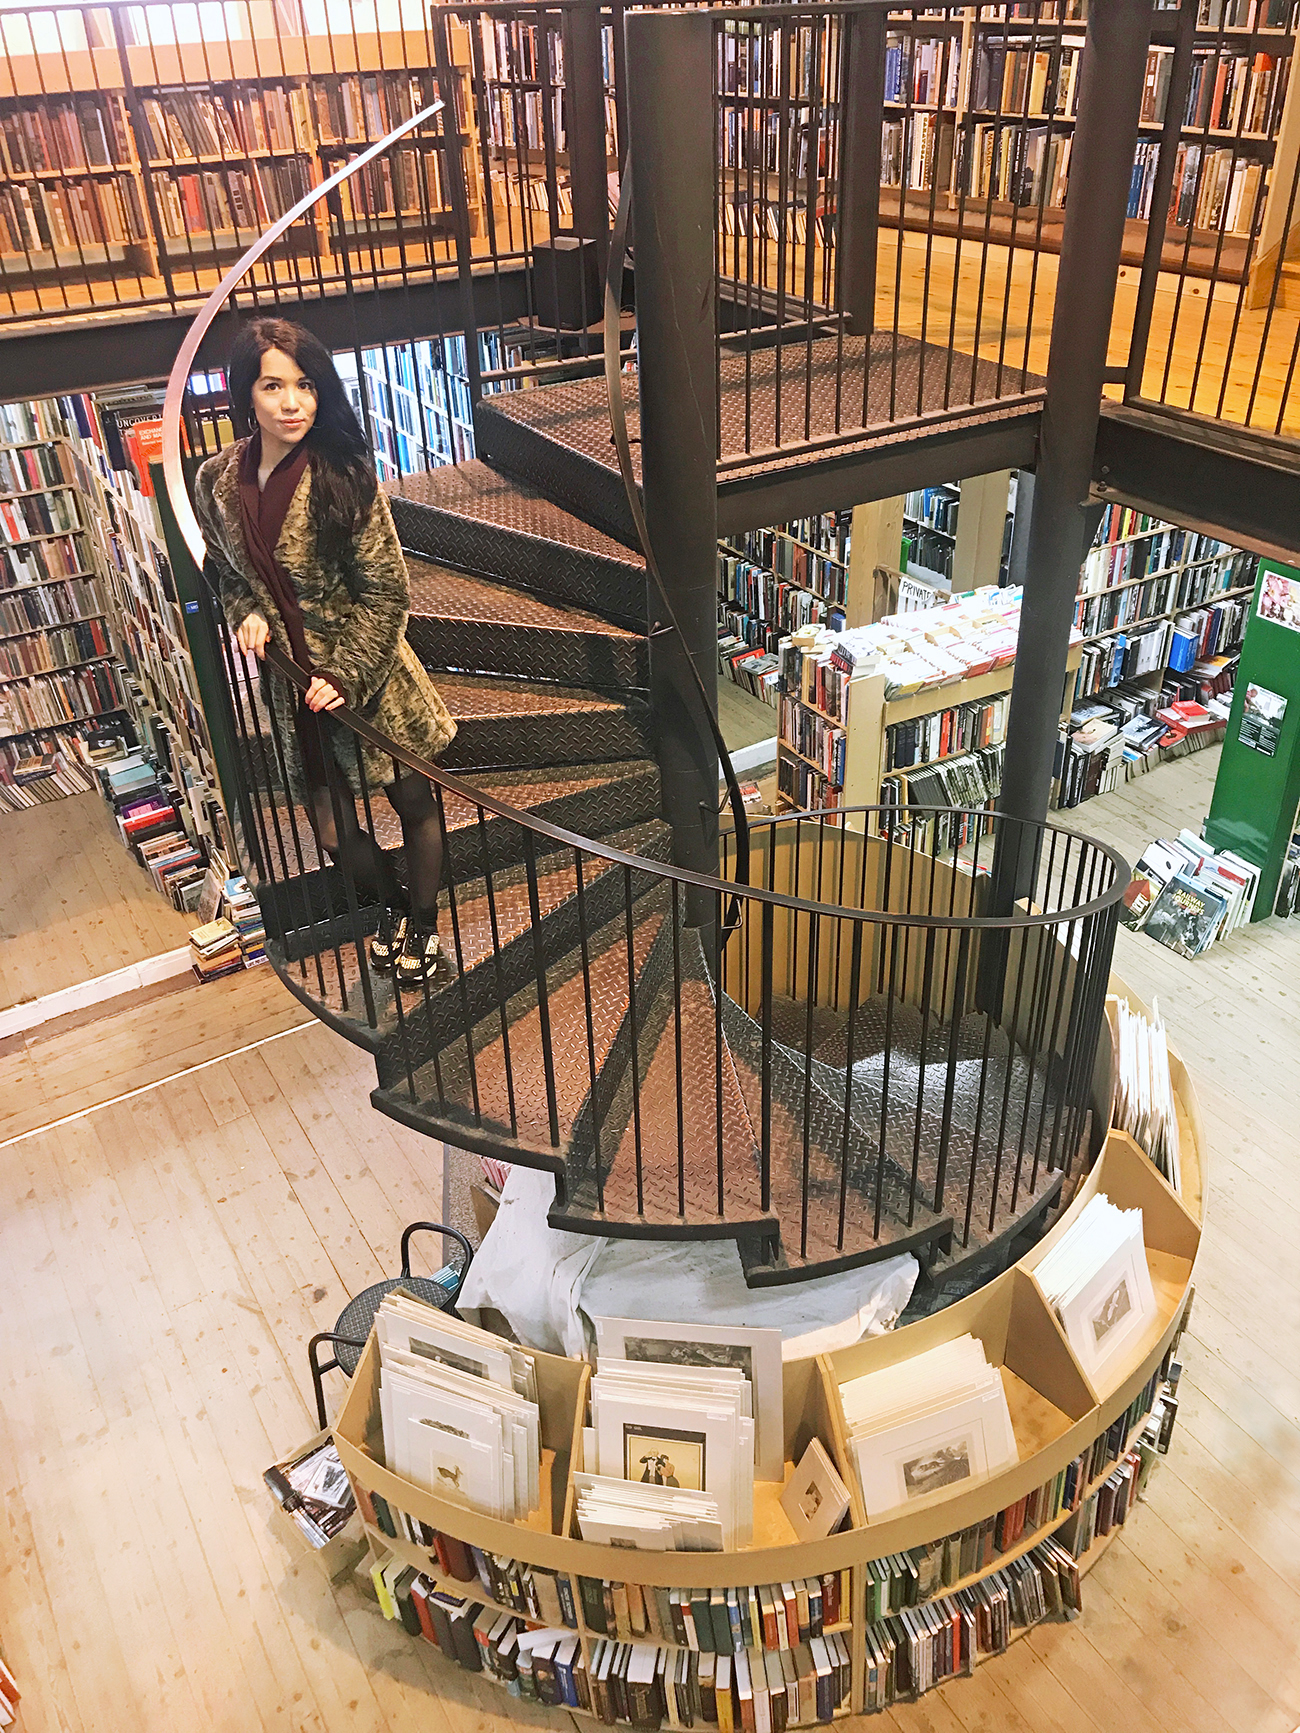 Leakey's bookshop in Inverness - one of the most beautiful bookshops in Europe